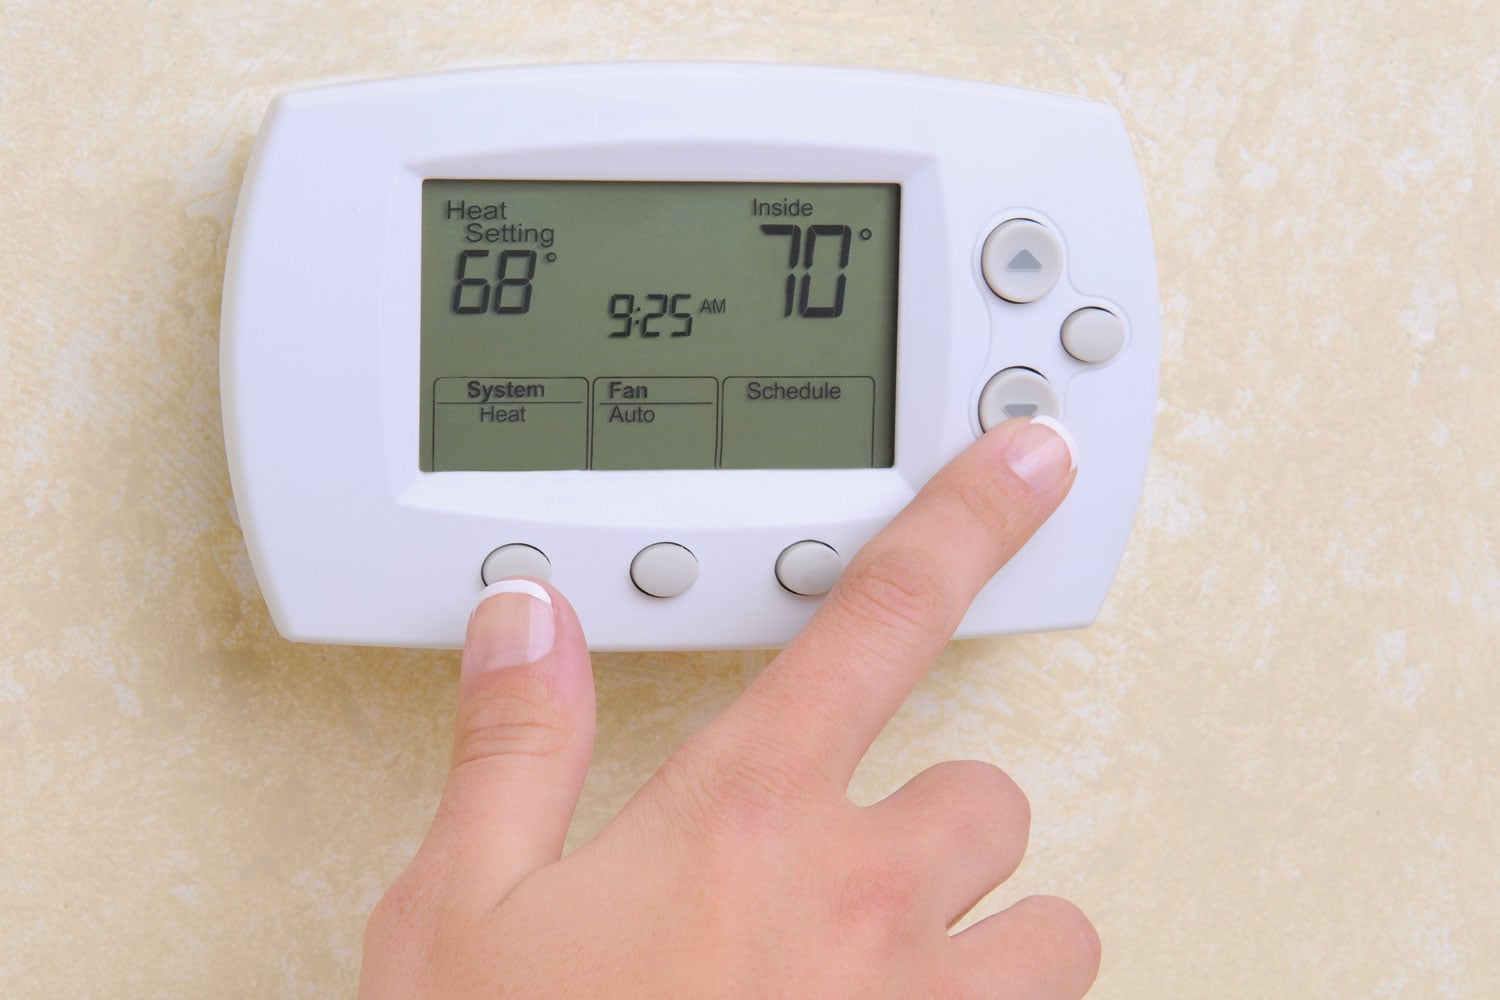 Changing the temperature of the thermostat